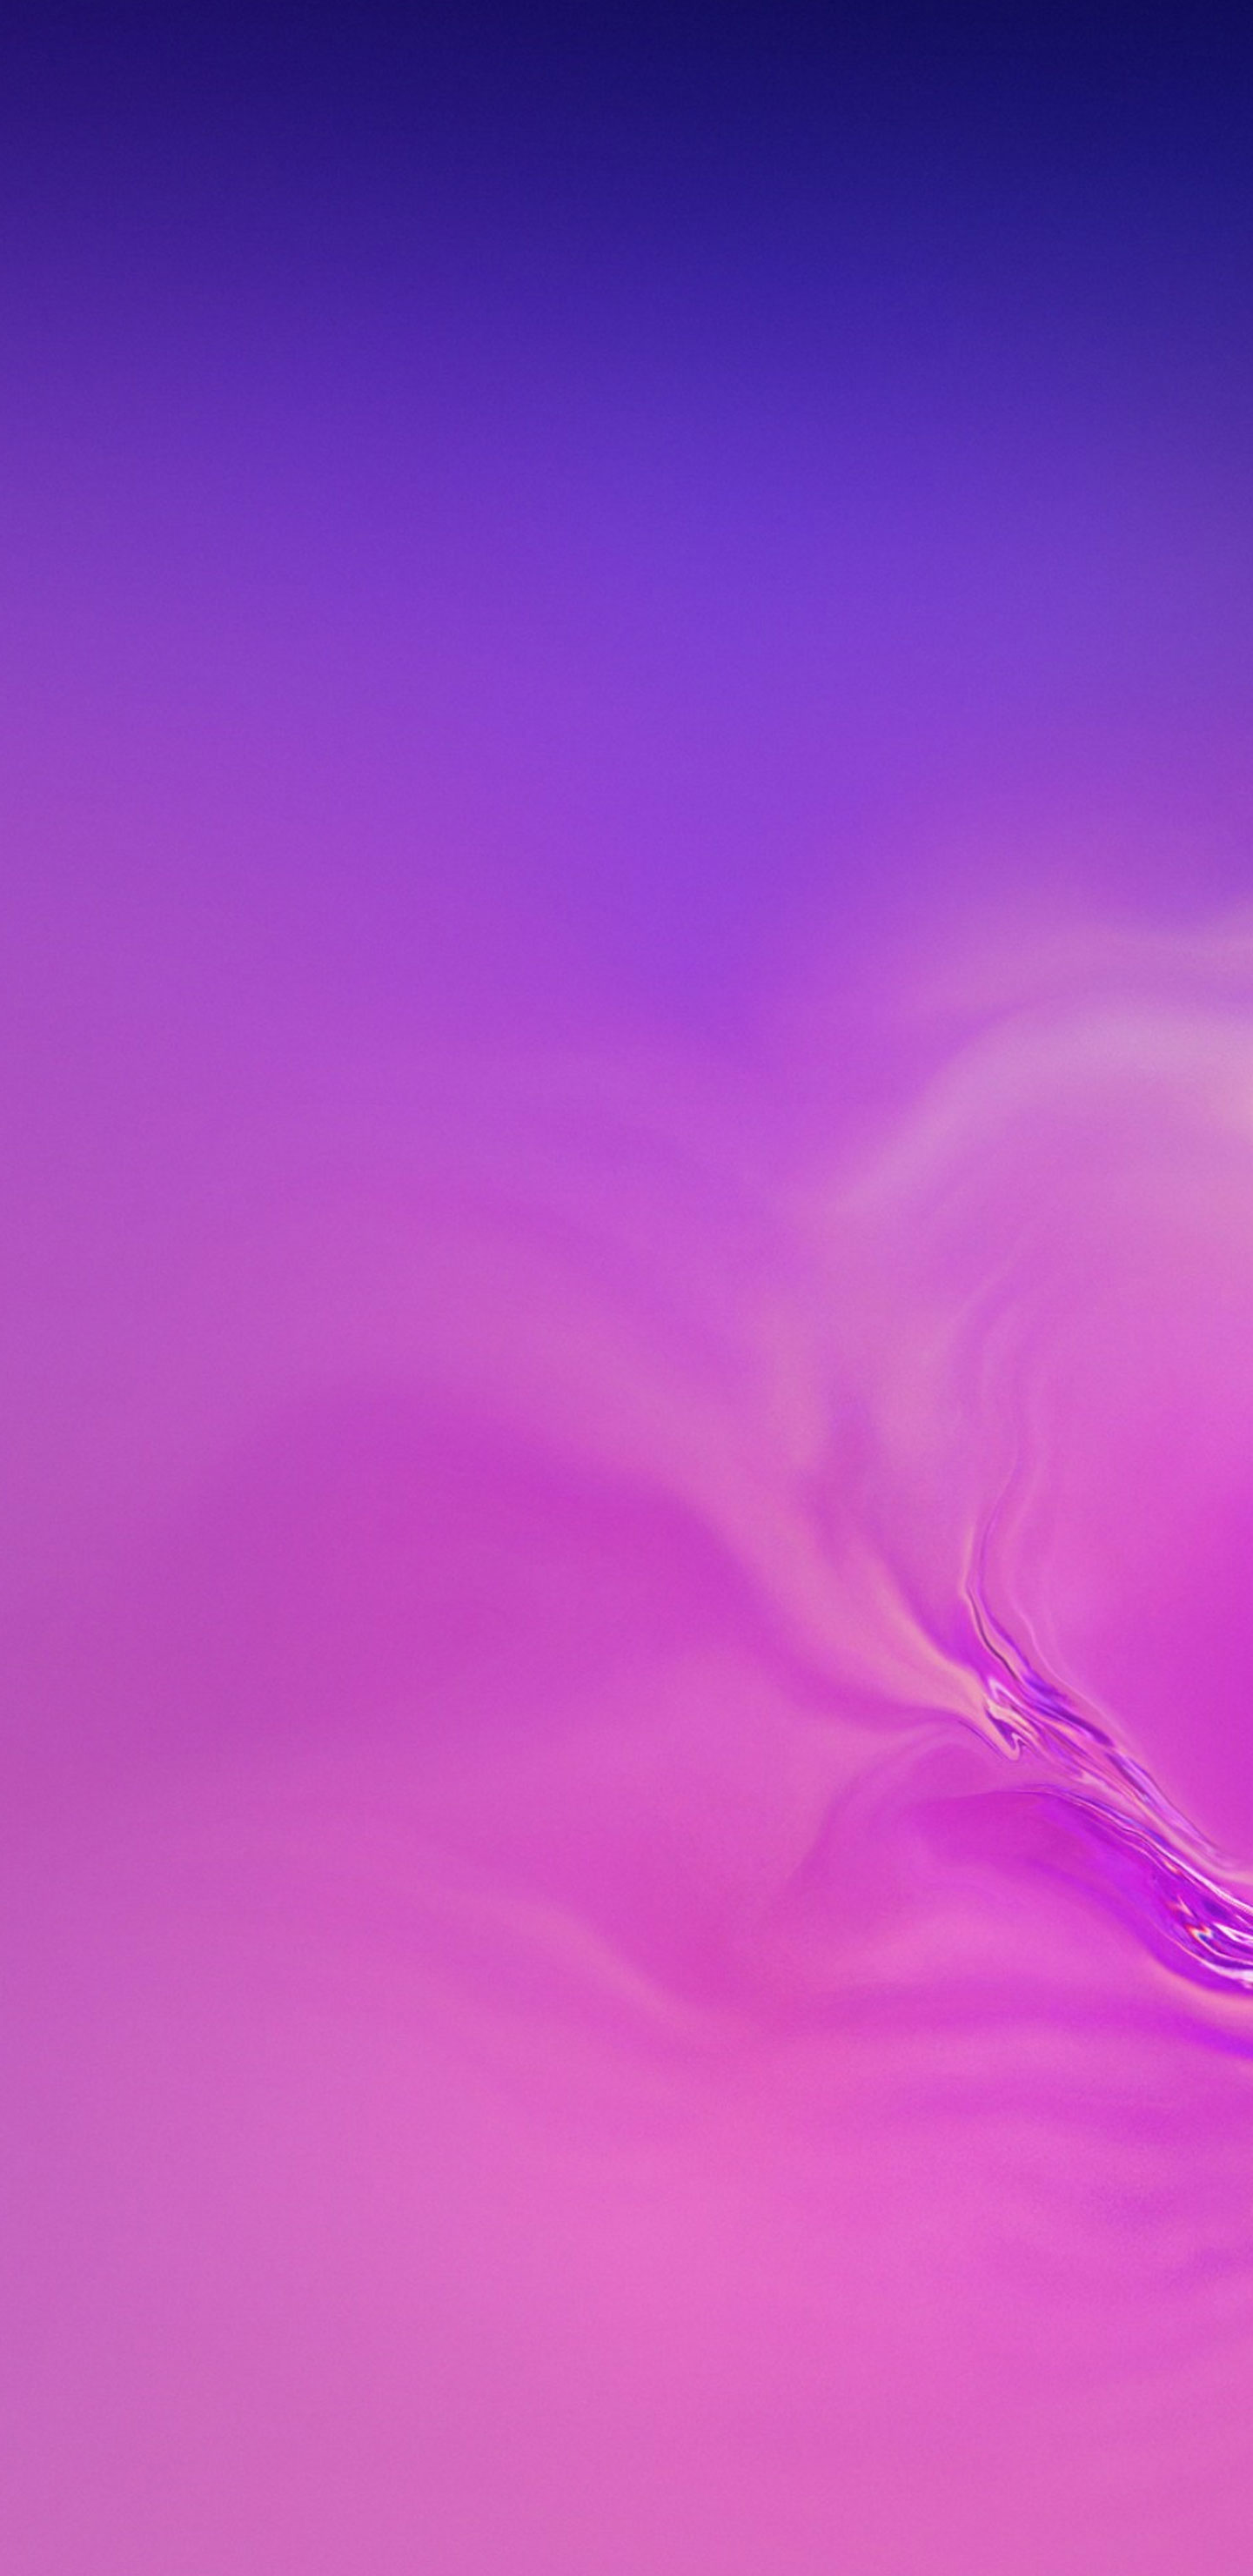 Samsung Galaxy S10 Stock Wallpapers 3